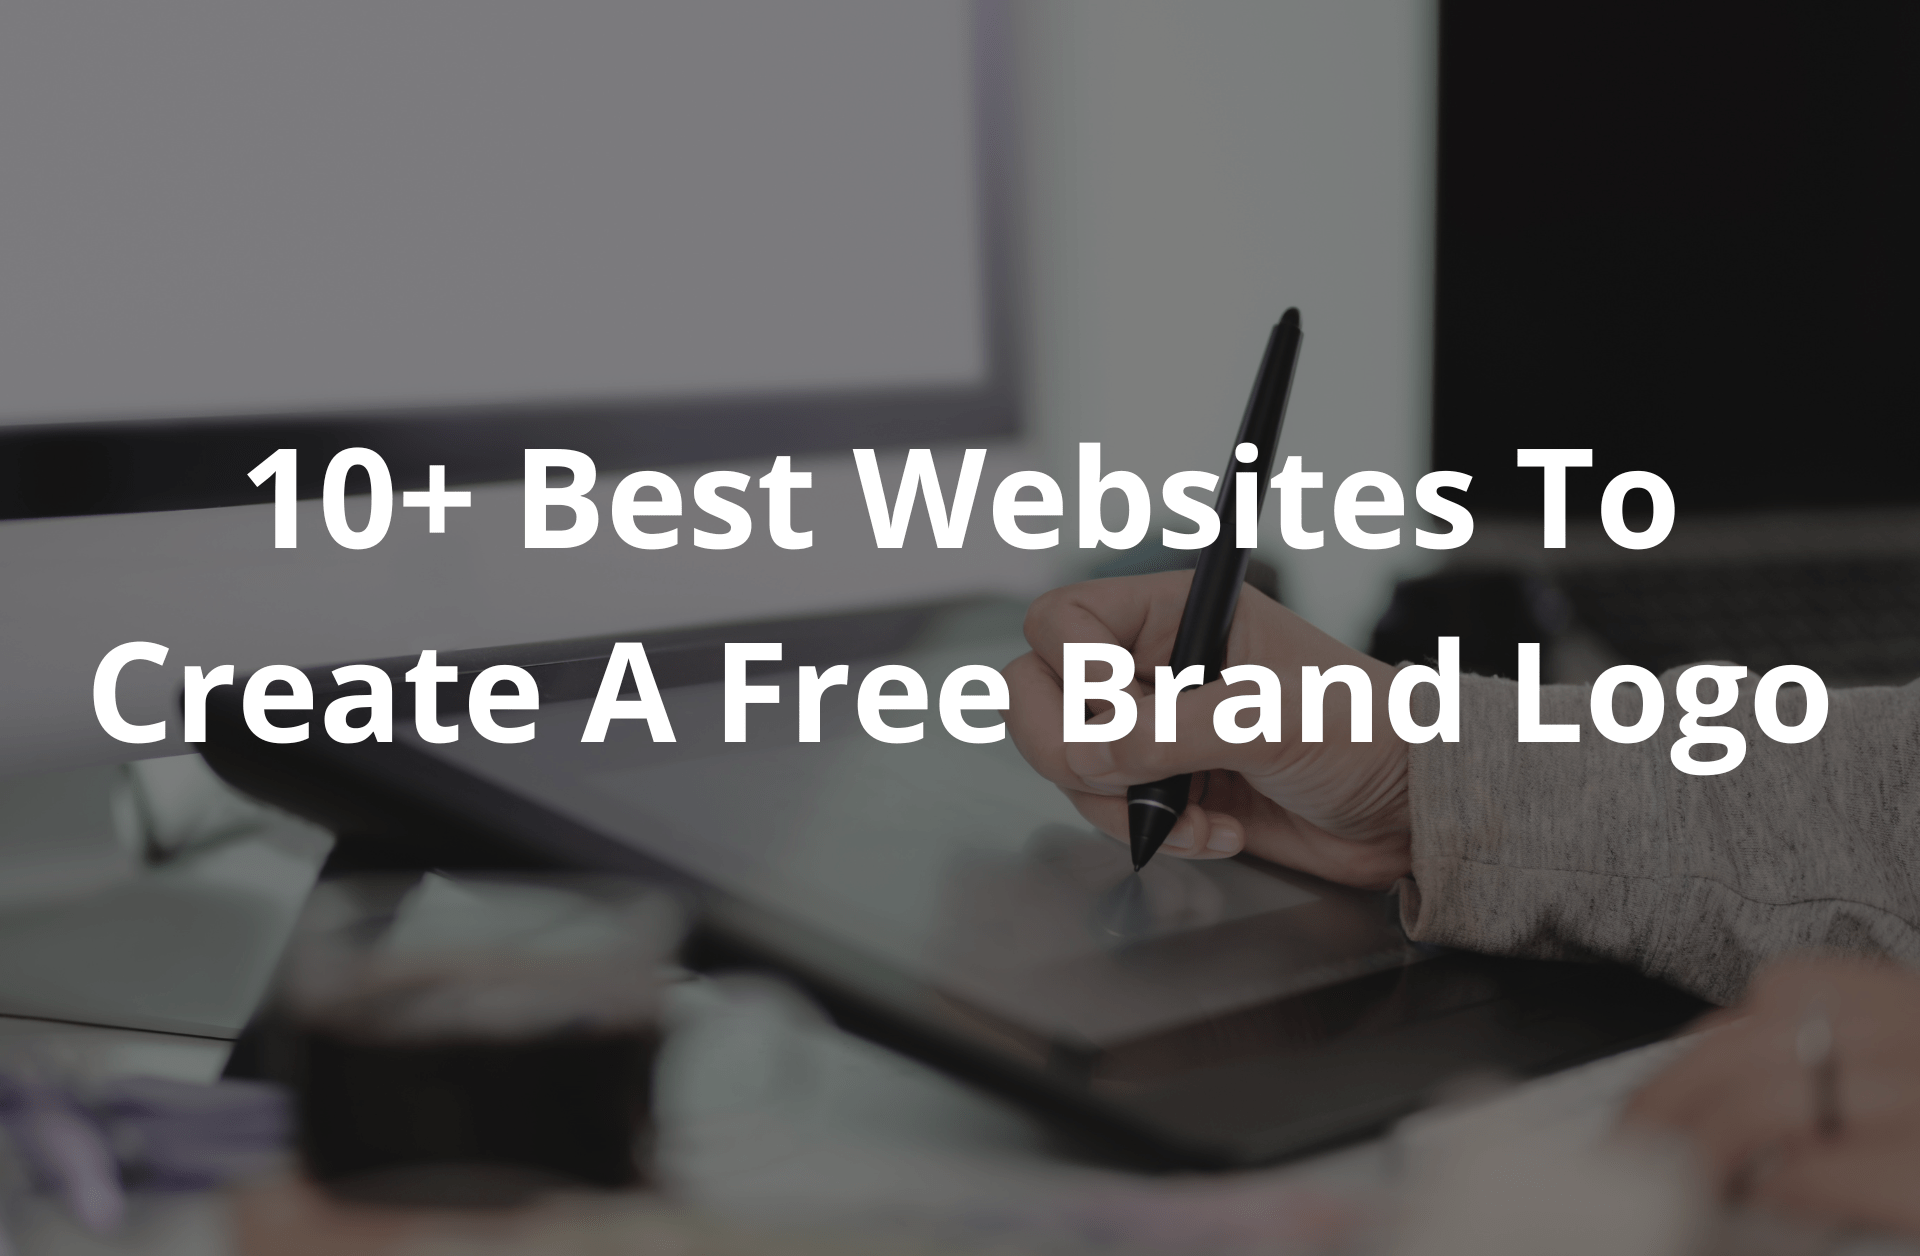 You are currently viewing 10+ Best Websites To Create A Free Brand Logo